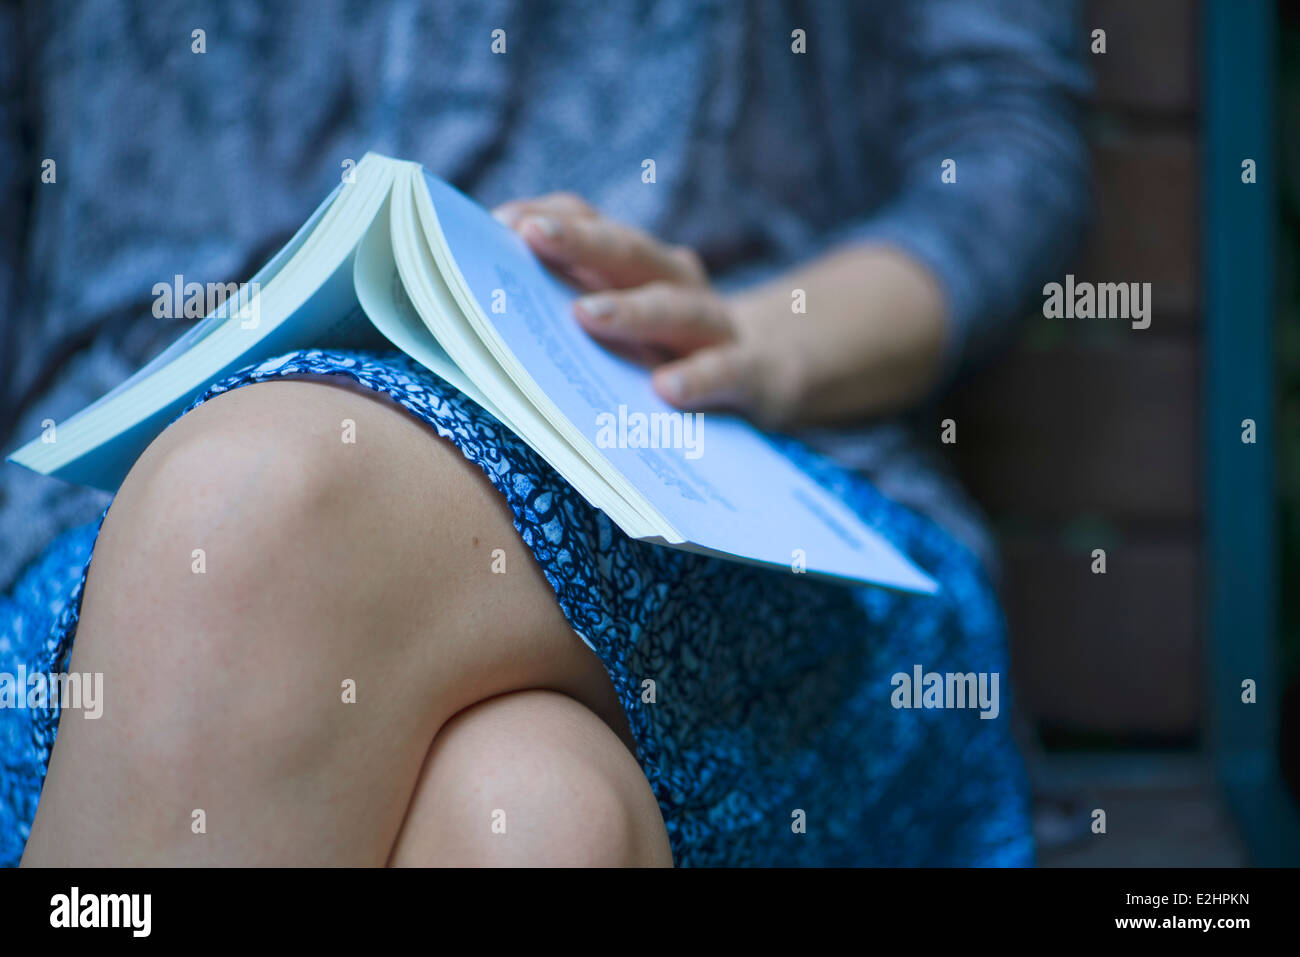 Woman sitting with open book resting on lap, cropped Stock Photo